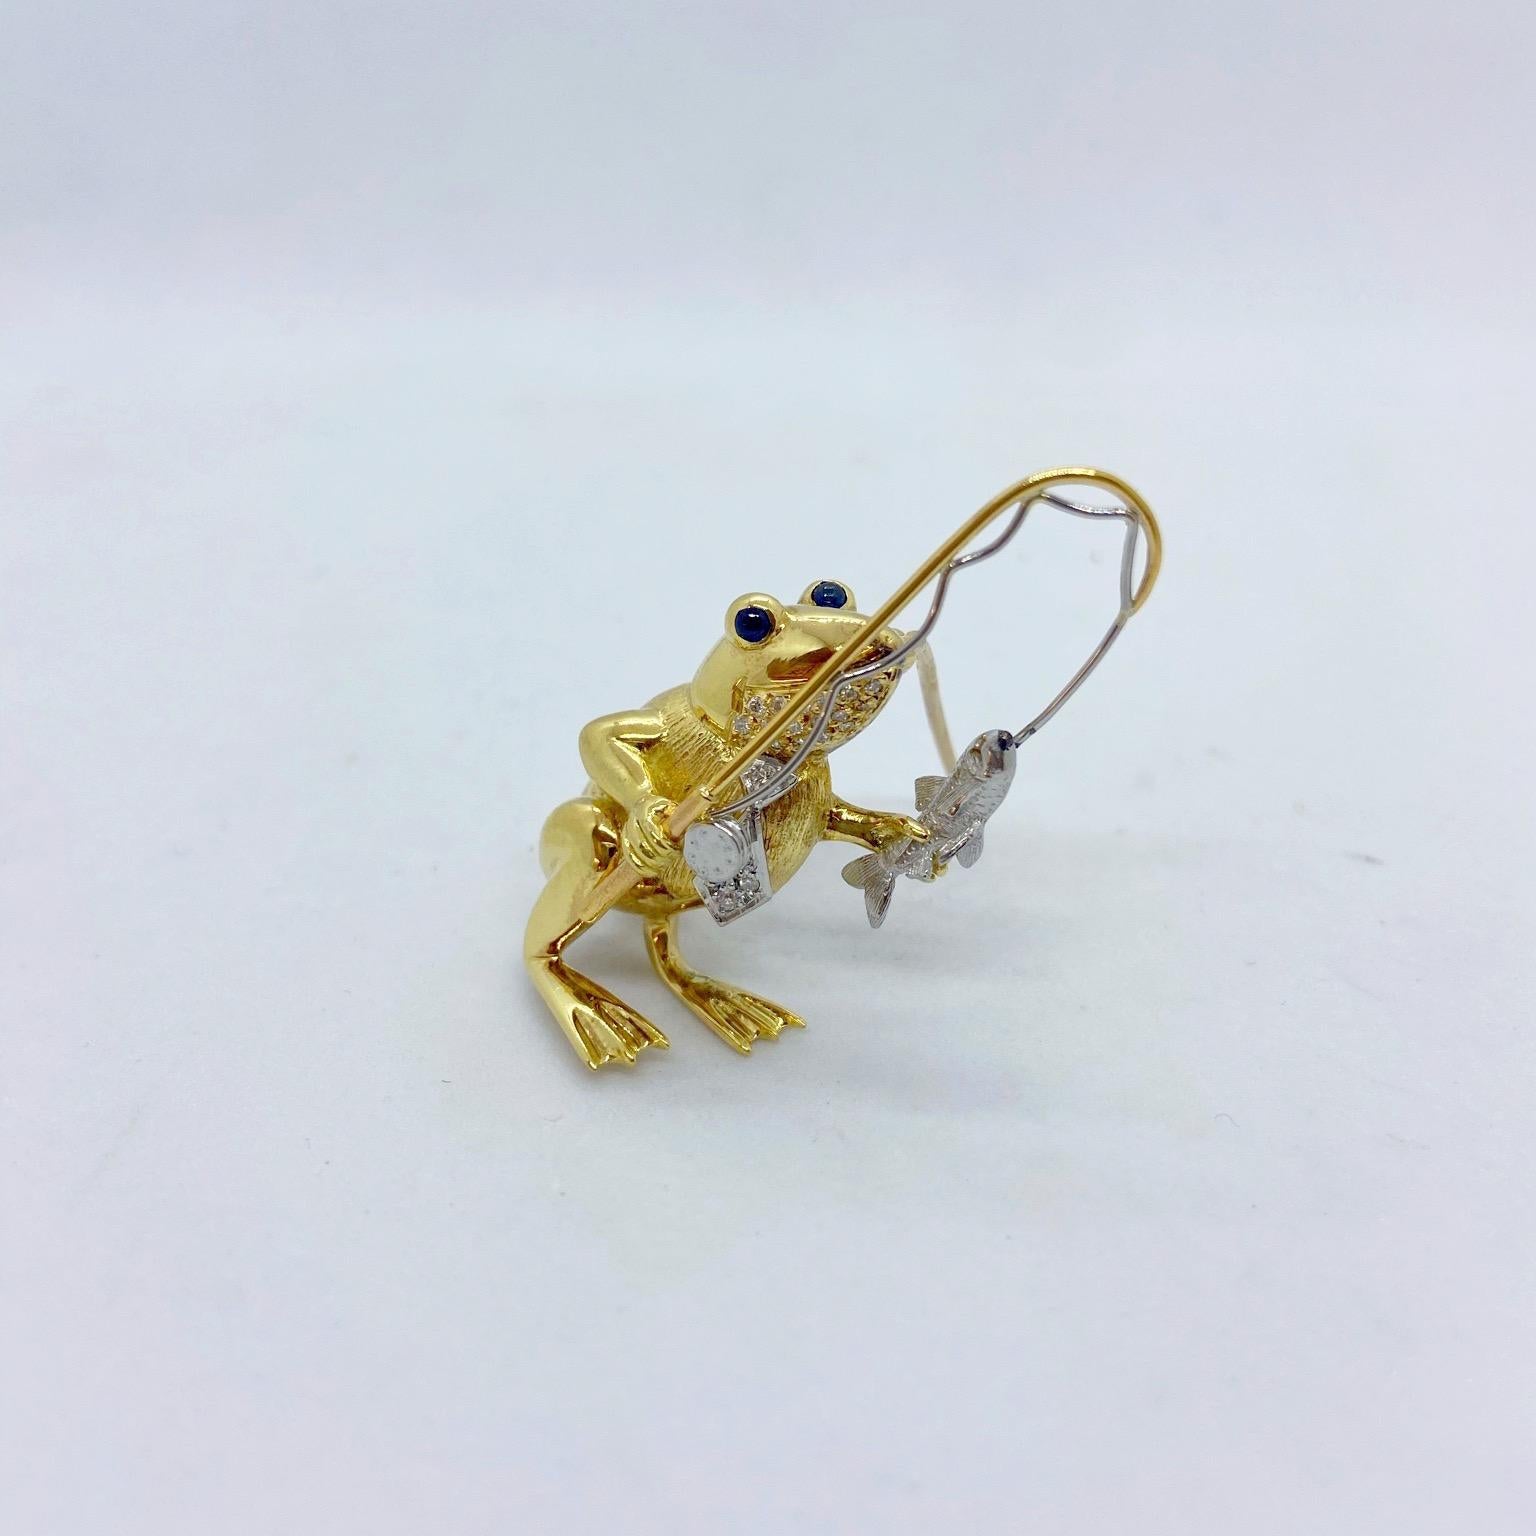 E. Wolfe & Co is a family-run fine jewellery manufacturing Workshop, established in 1850 and located in central London. They specialize in creating beautiful bespoke pieces - such as this one created for Cellini Jewelers In NYC. 
An adorable yellow